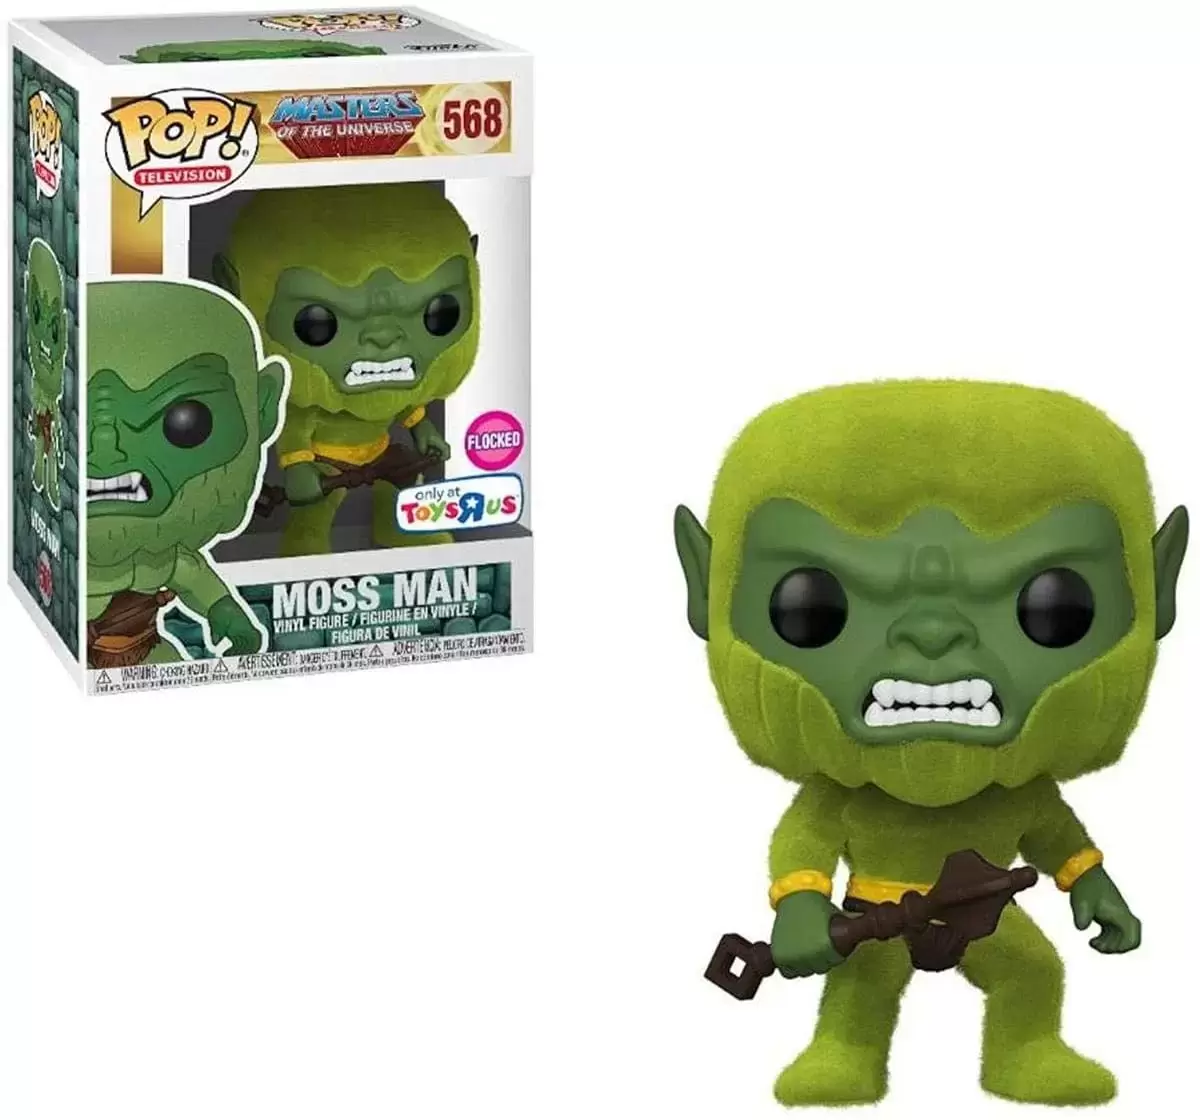 POP! Television - Masters of the Universe - Moss Man Flocked